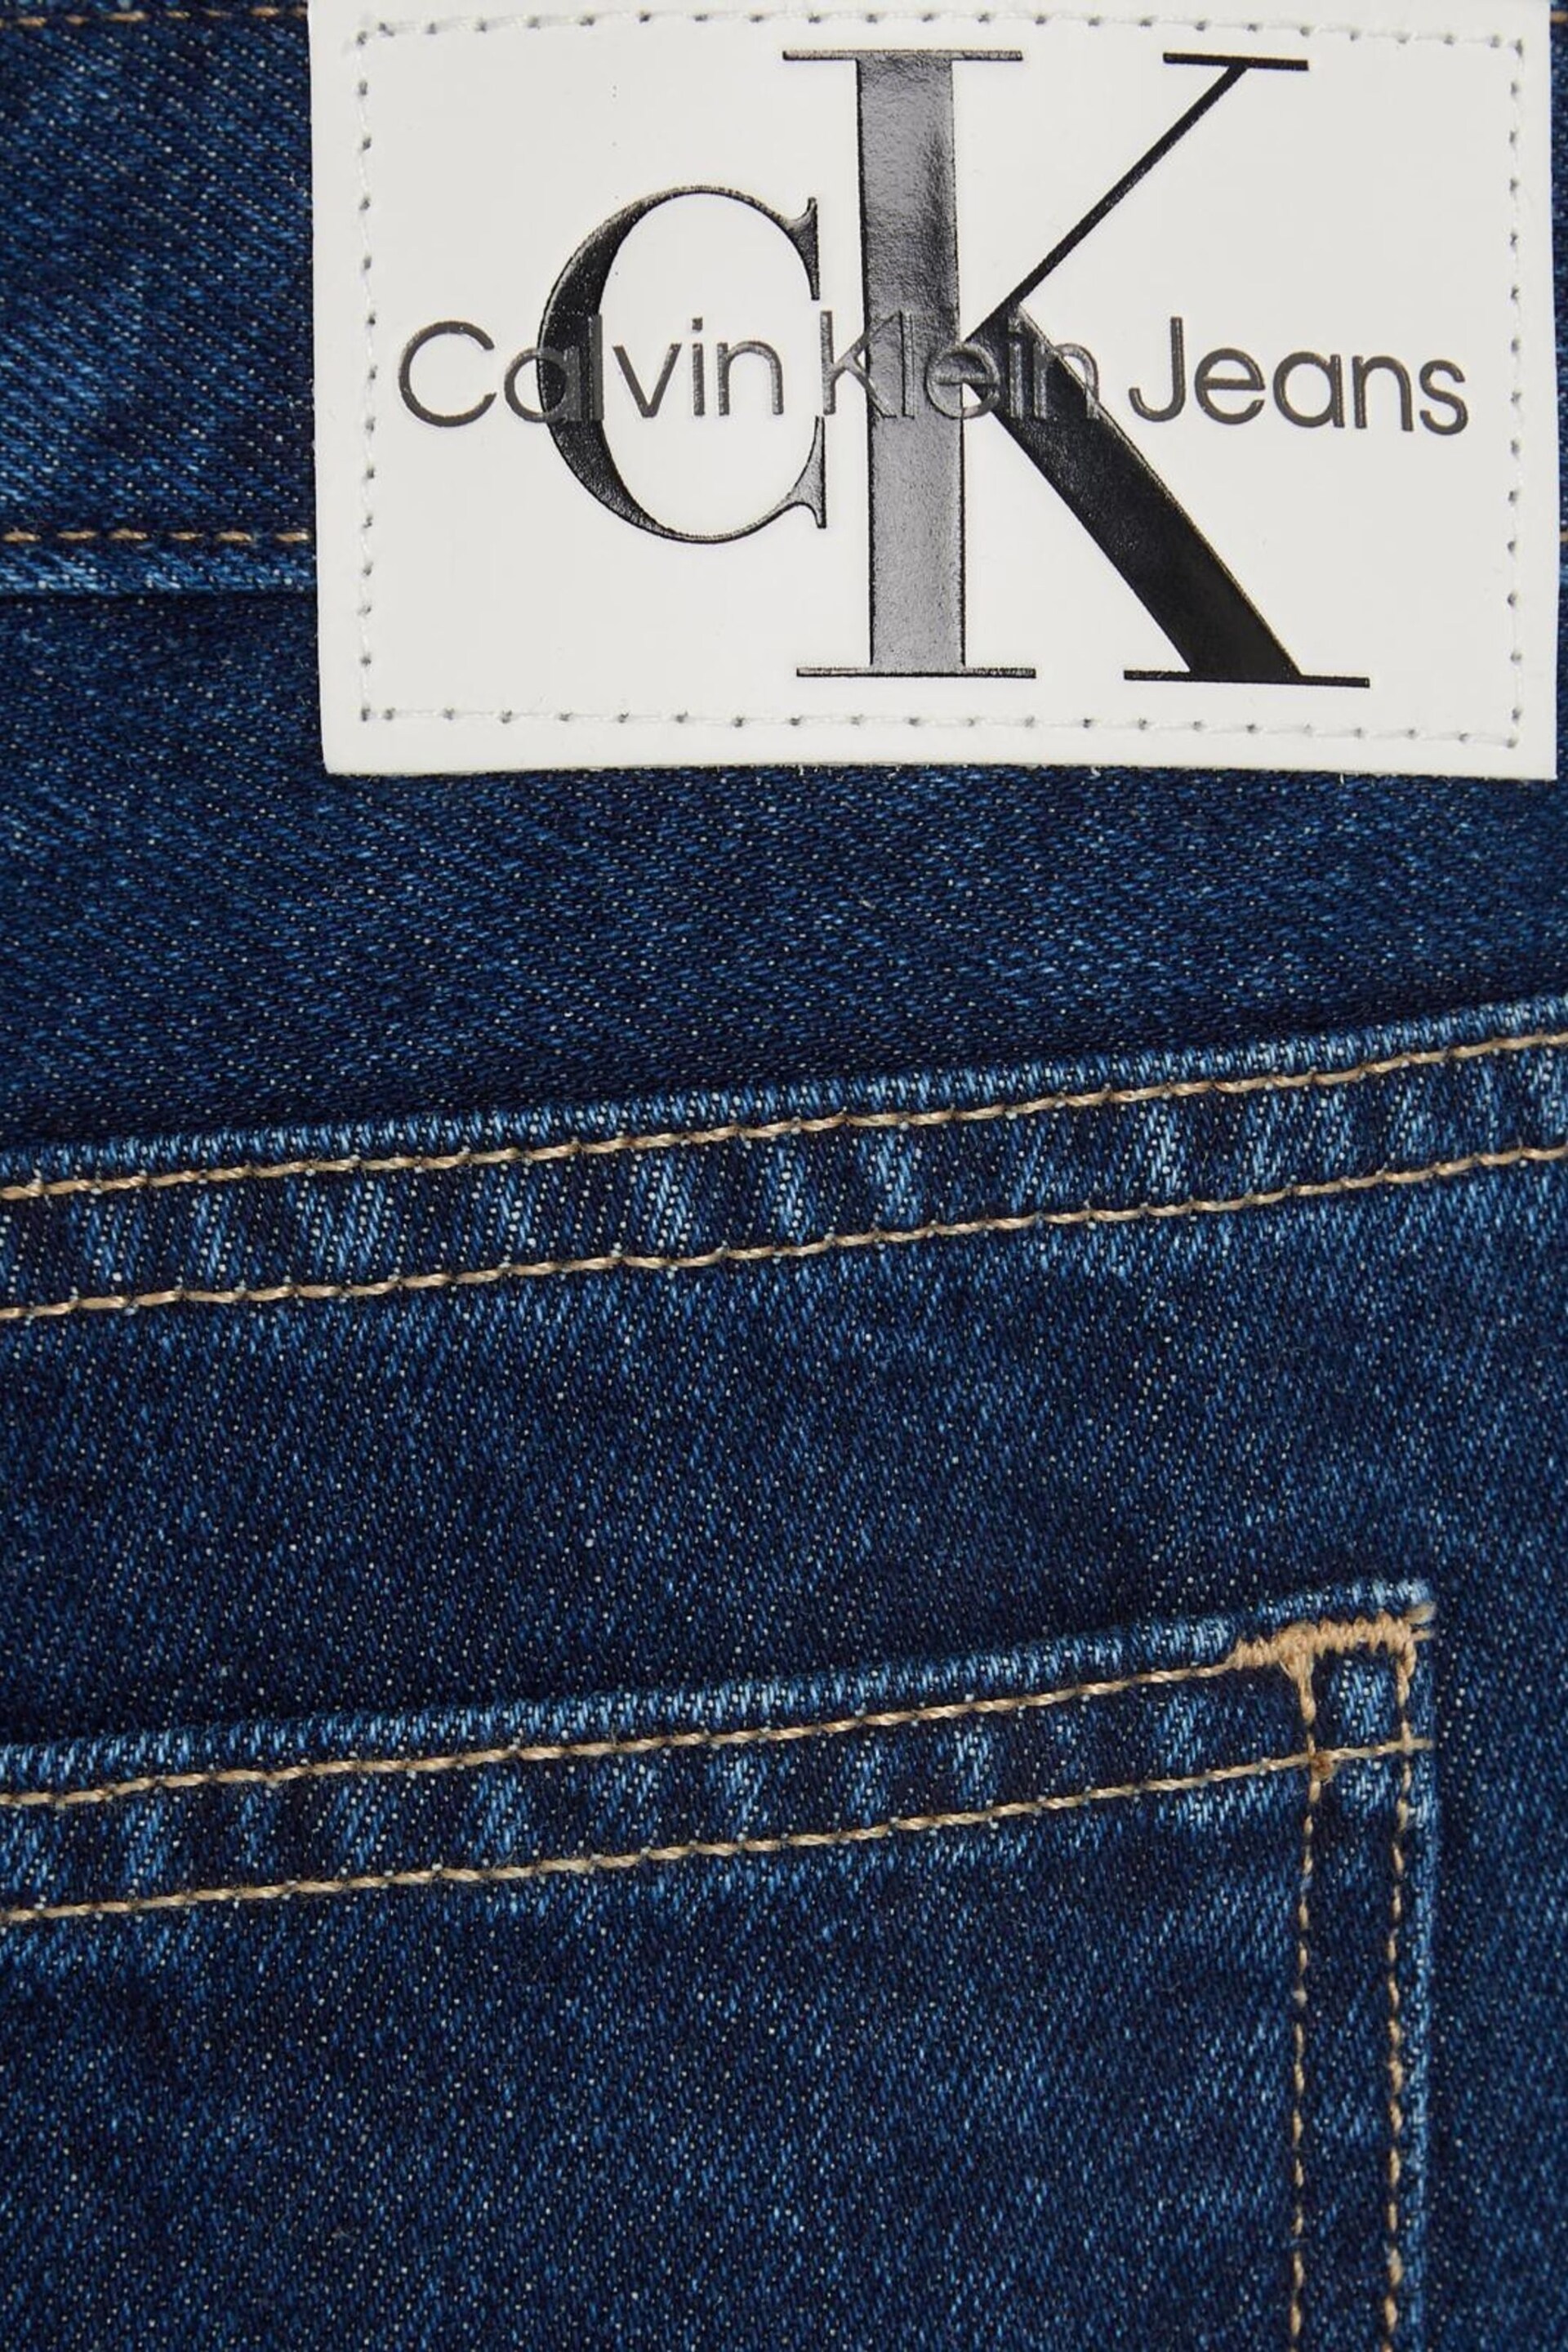 Calvin Klein Blue Low Rise Baggy Jeans - Image 5 of 5